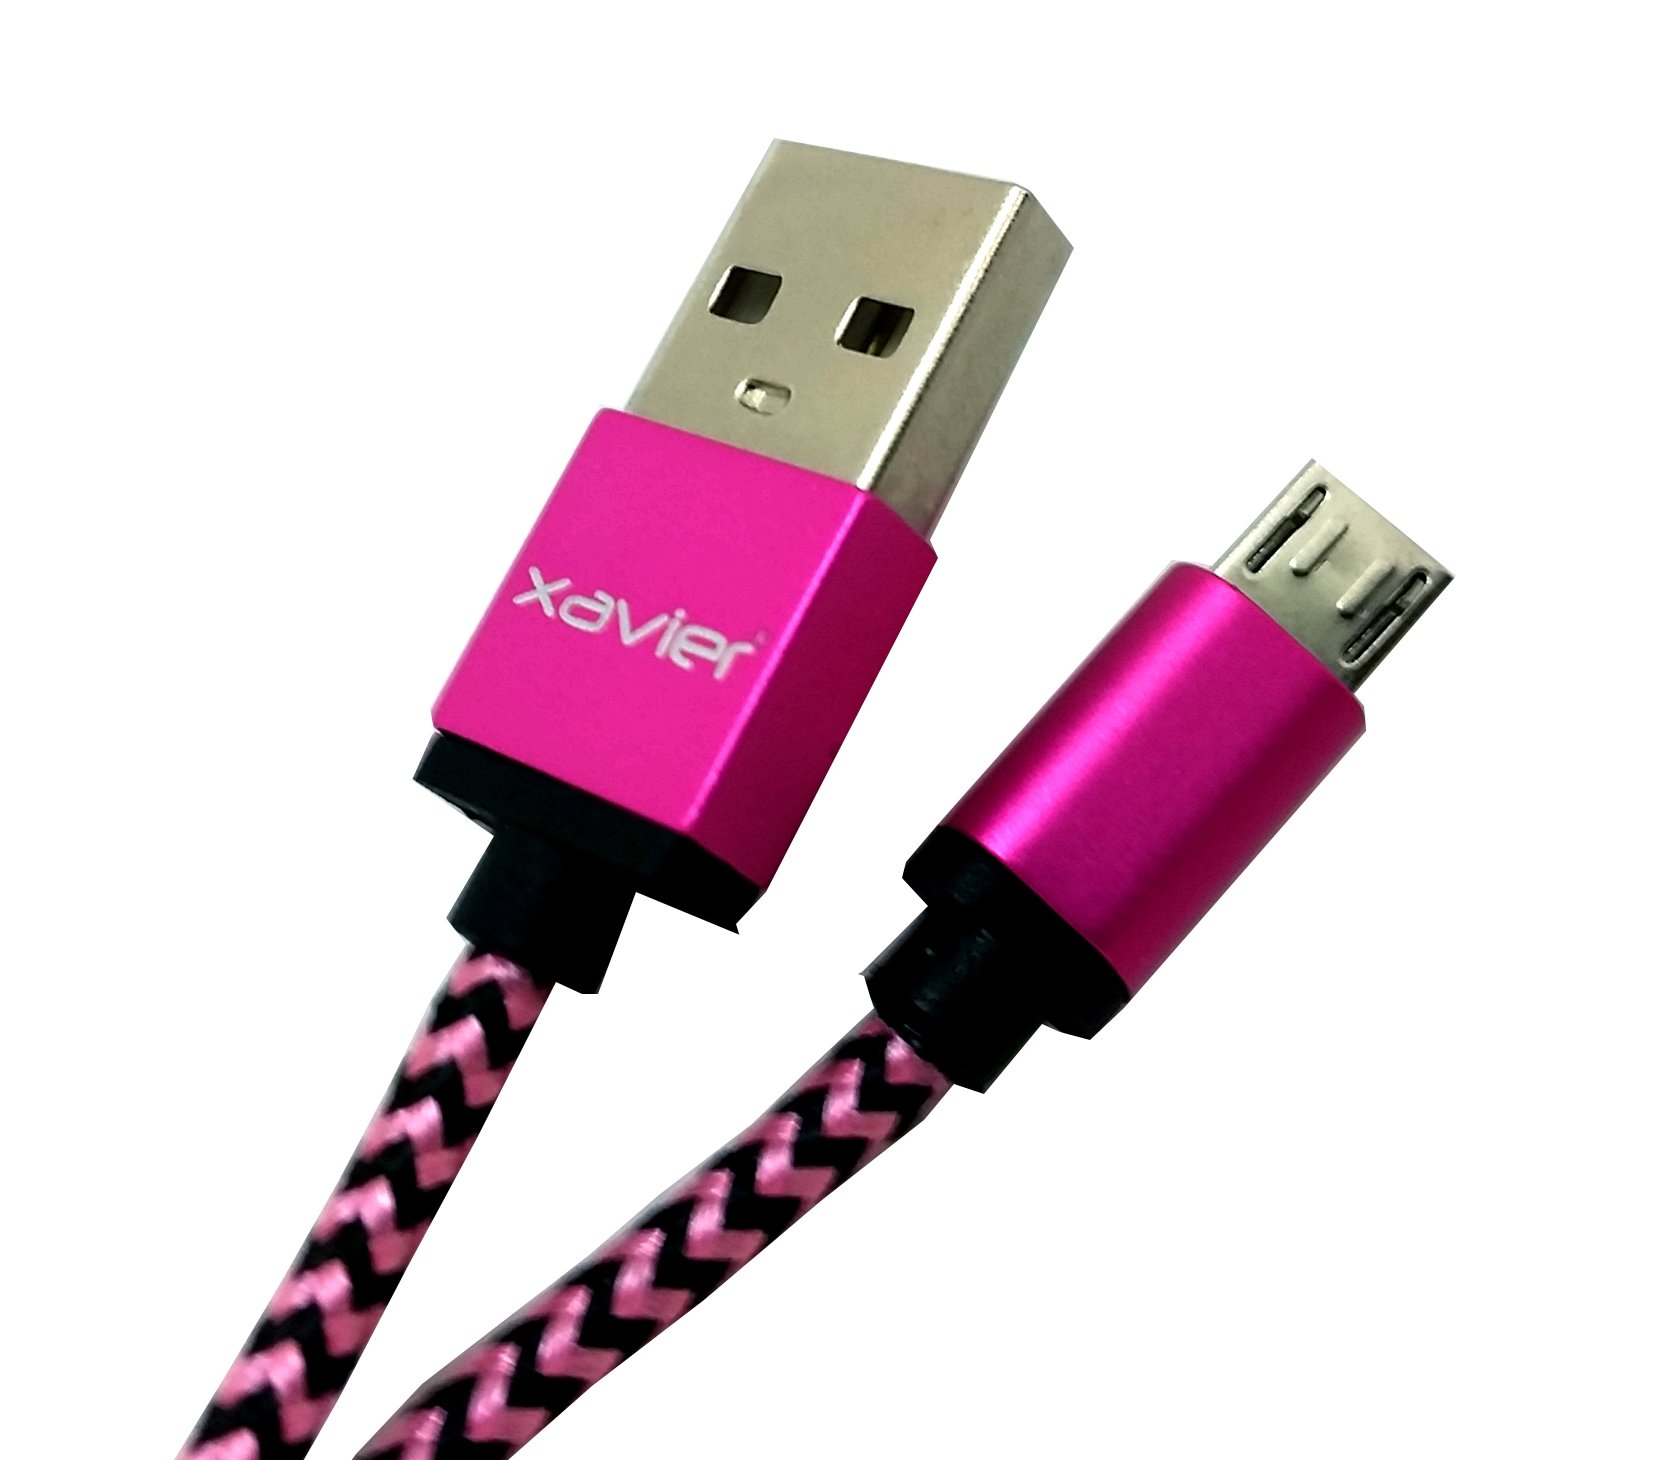 New Braided Lightning & Micro USB with Metal ends by Professional Cable